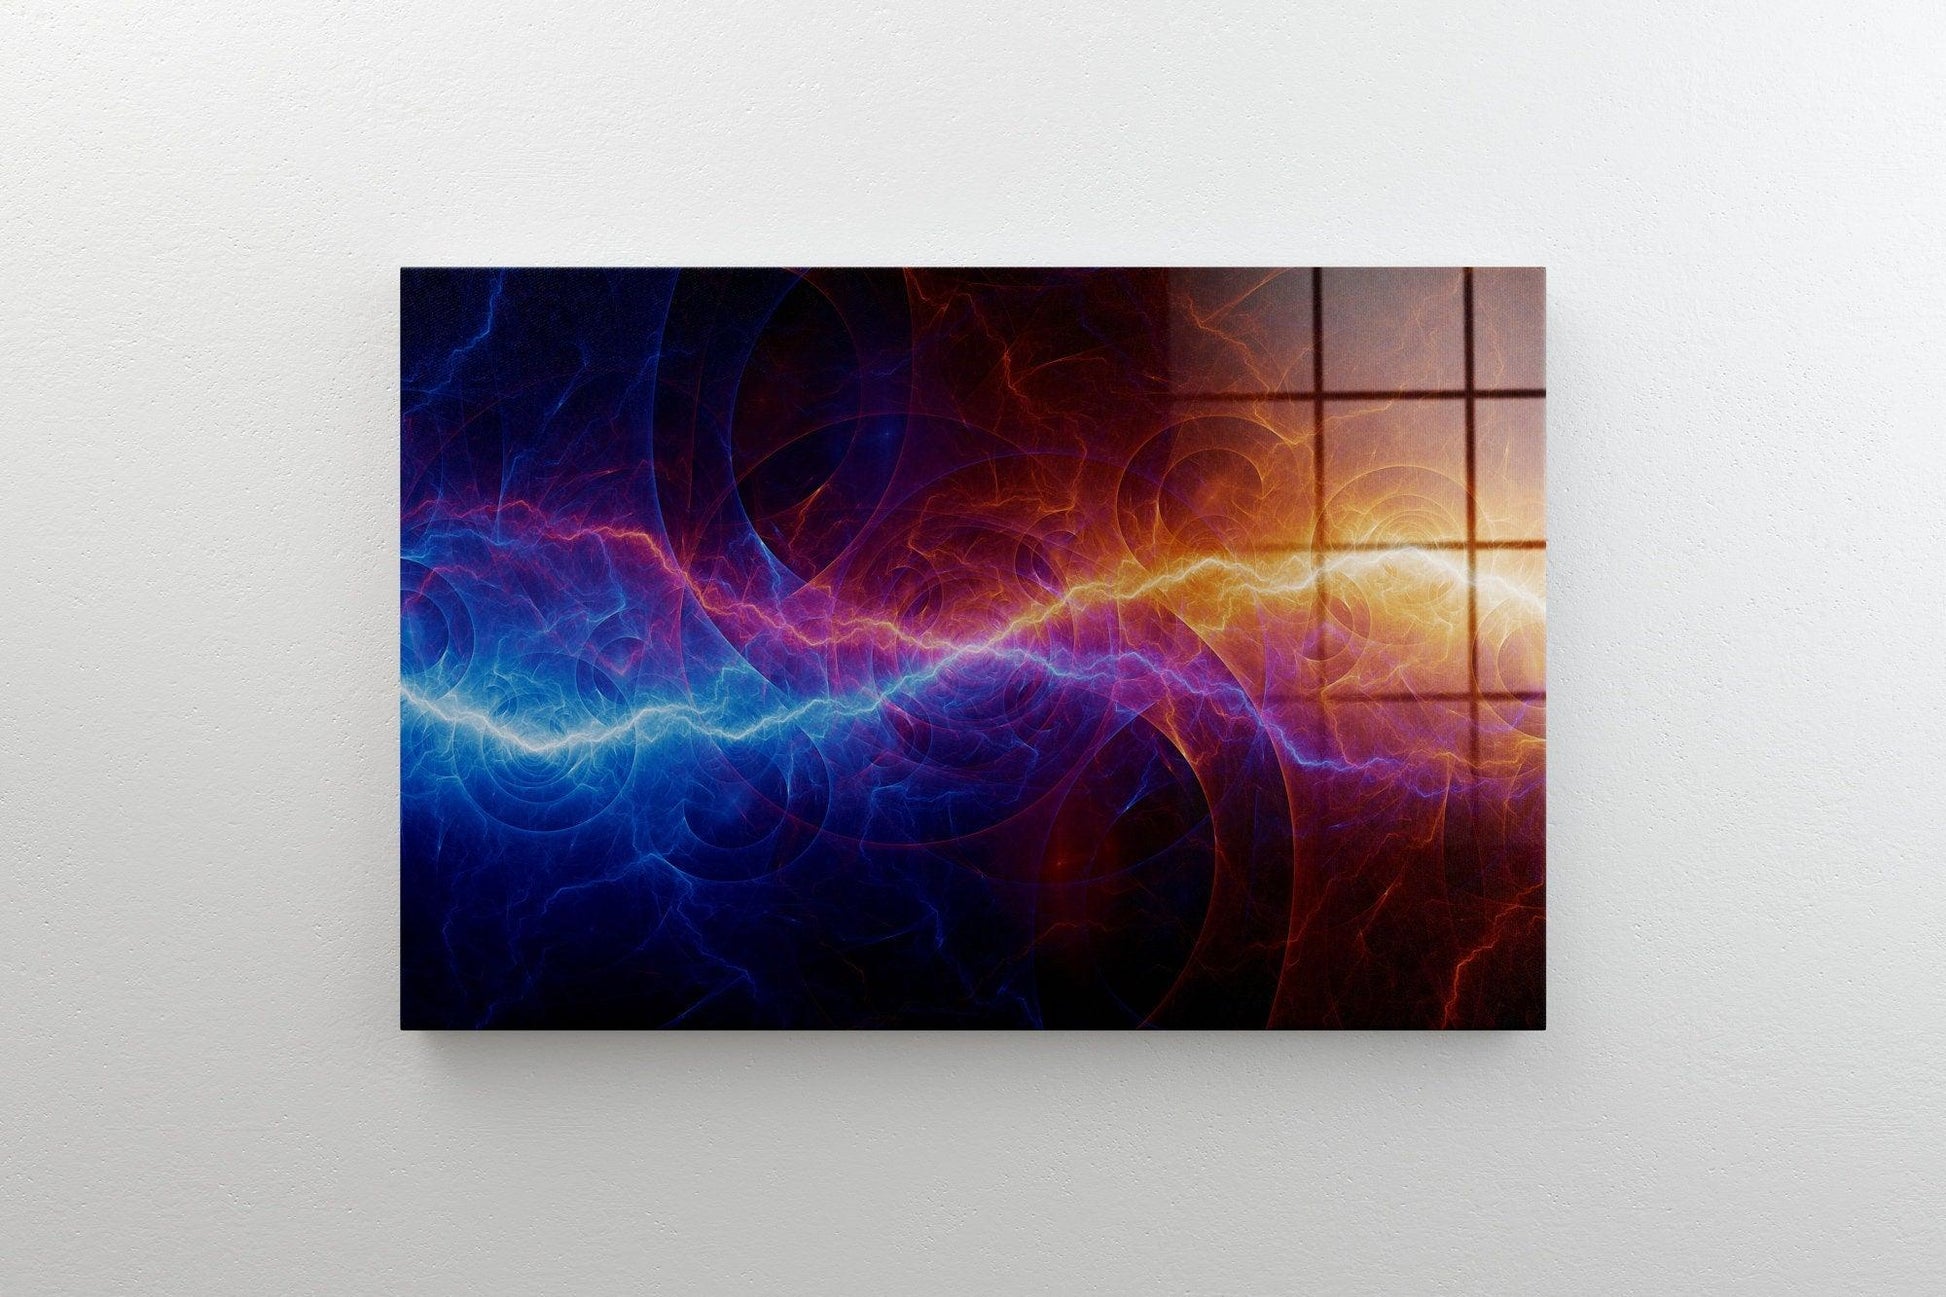 Red Vs Blue Wall Art | Element War glass wall Art, Abstract home decor, Abstract Fire and Ice Poster, abstract painting on canvas, glass art